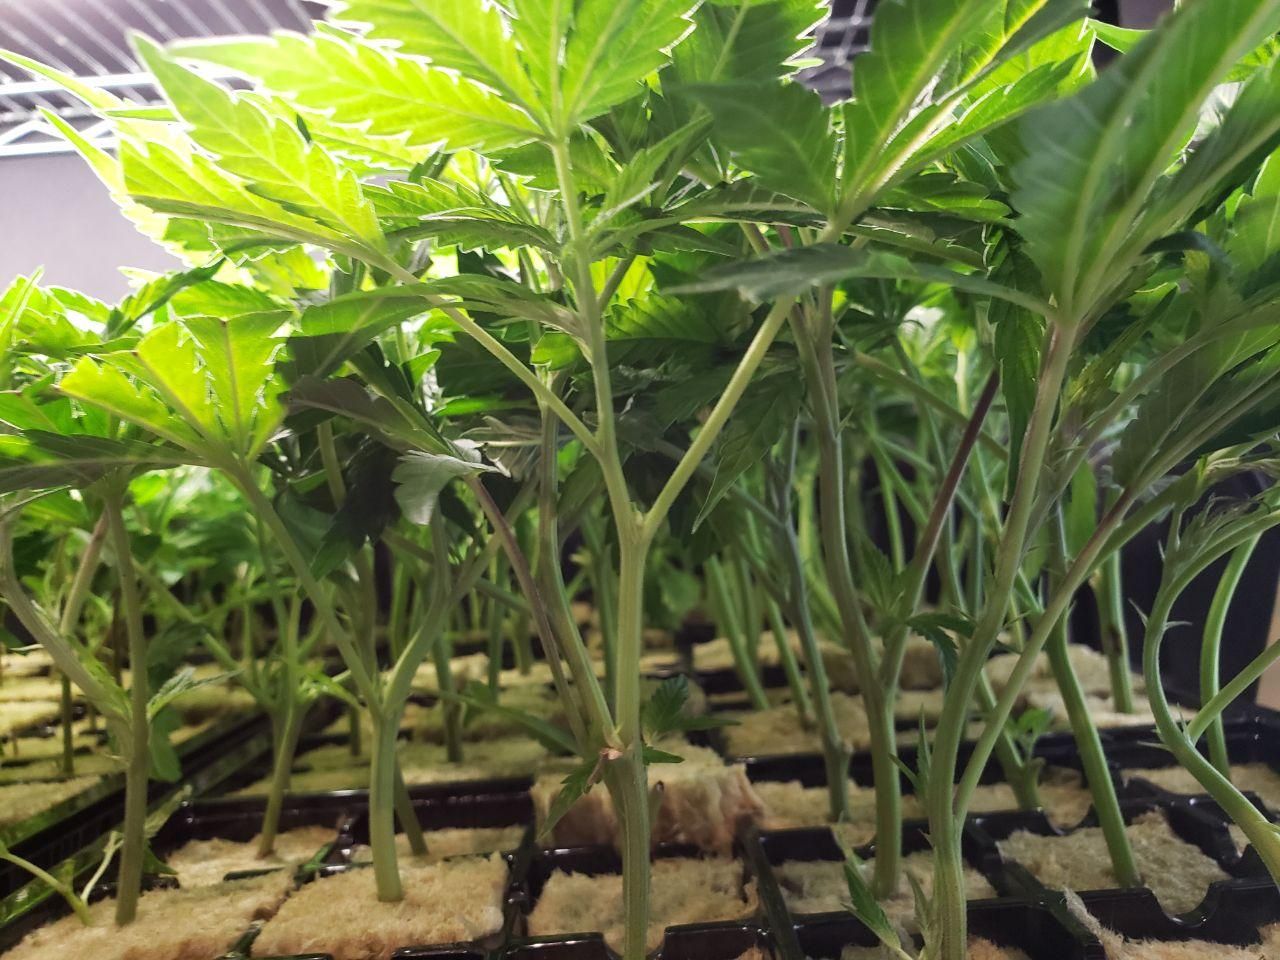 Fresh and healthy clones